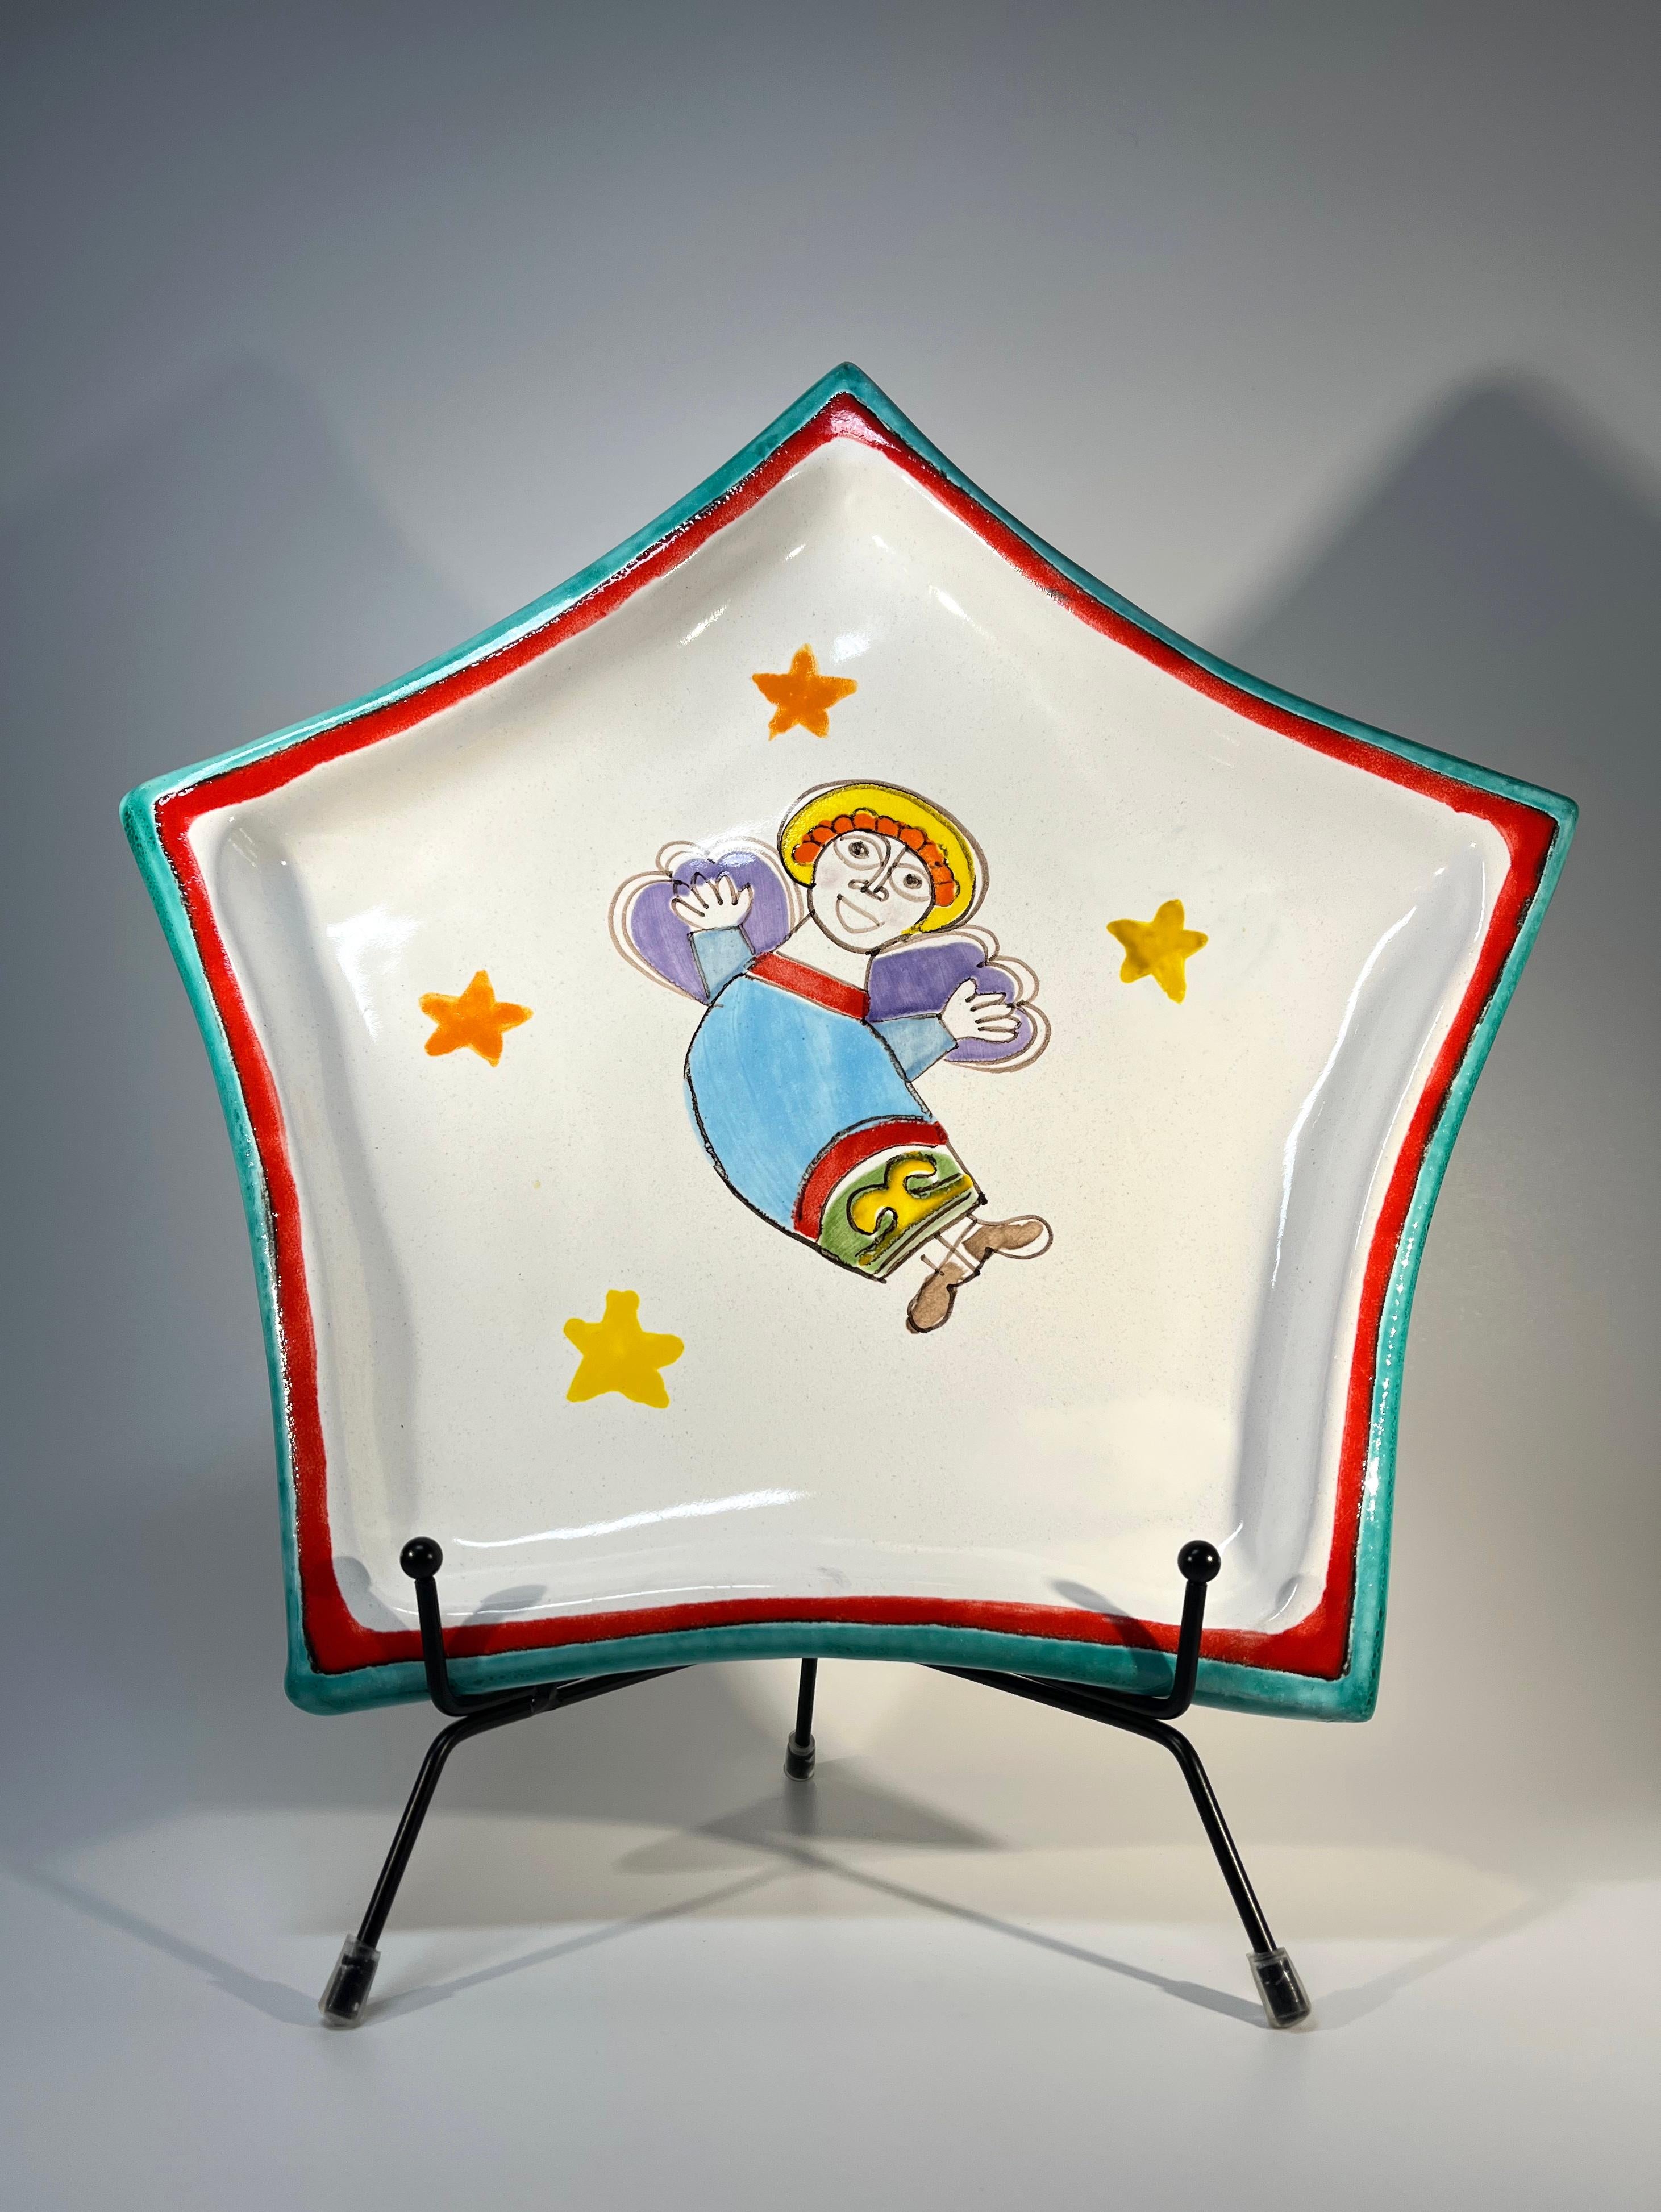 Heavenly And Joyous Angel Ceramic Star Platter By DeSimone, Italy, c1960 In Excellent Condition For Sale In Rothley, Leicestershire